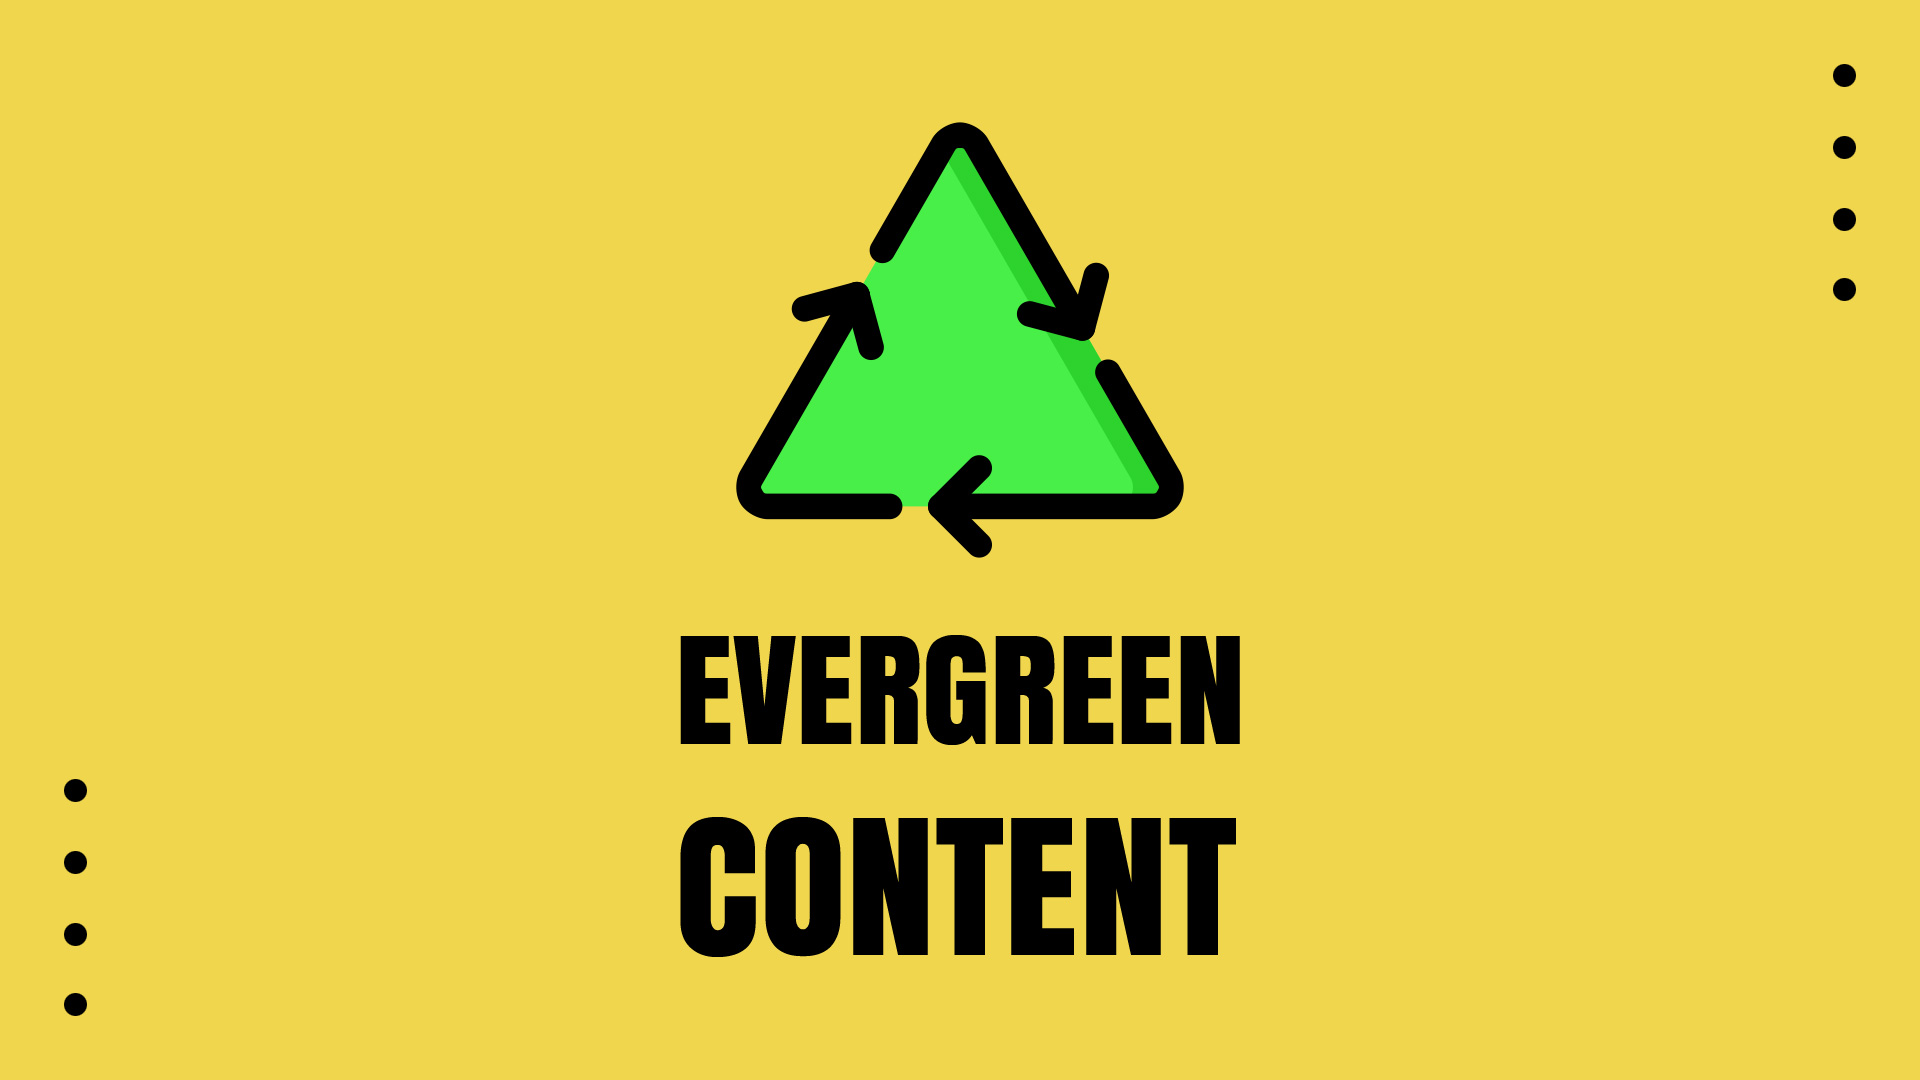 The Evergreen Content on a yellow background